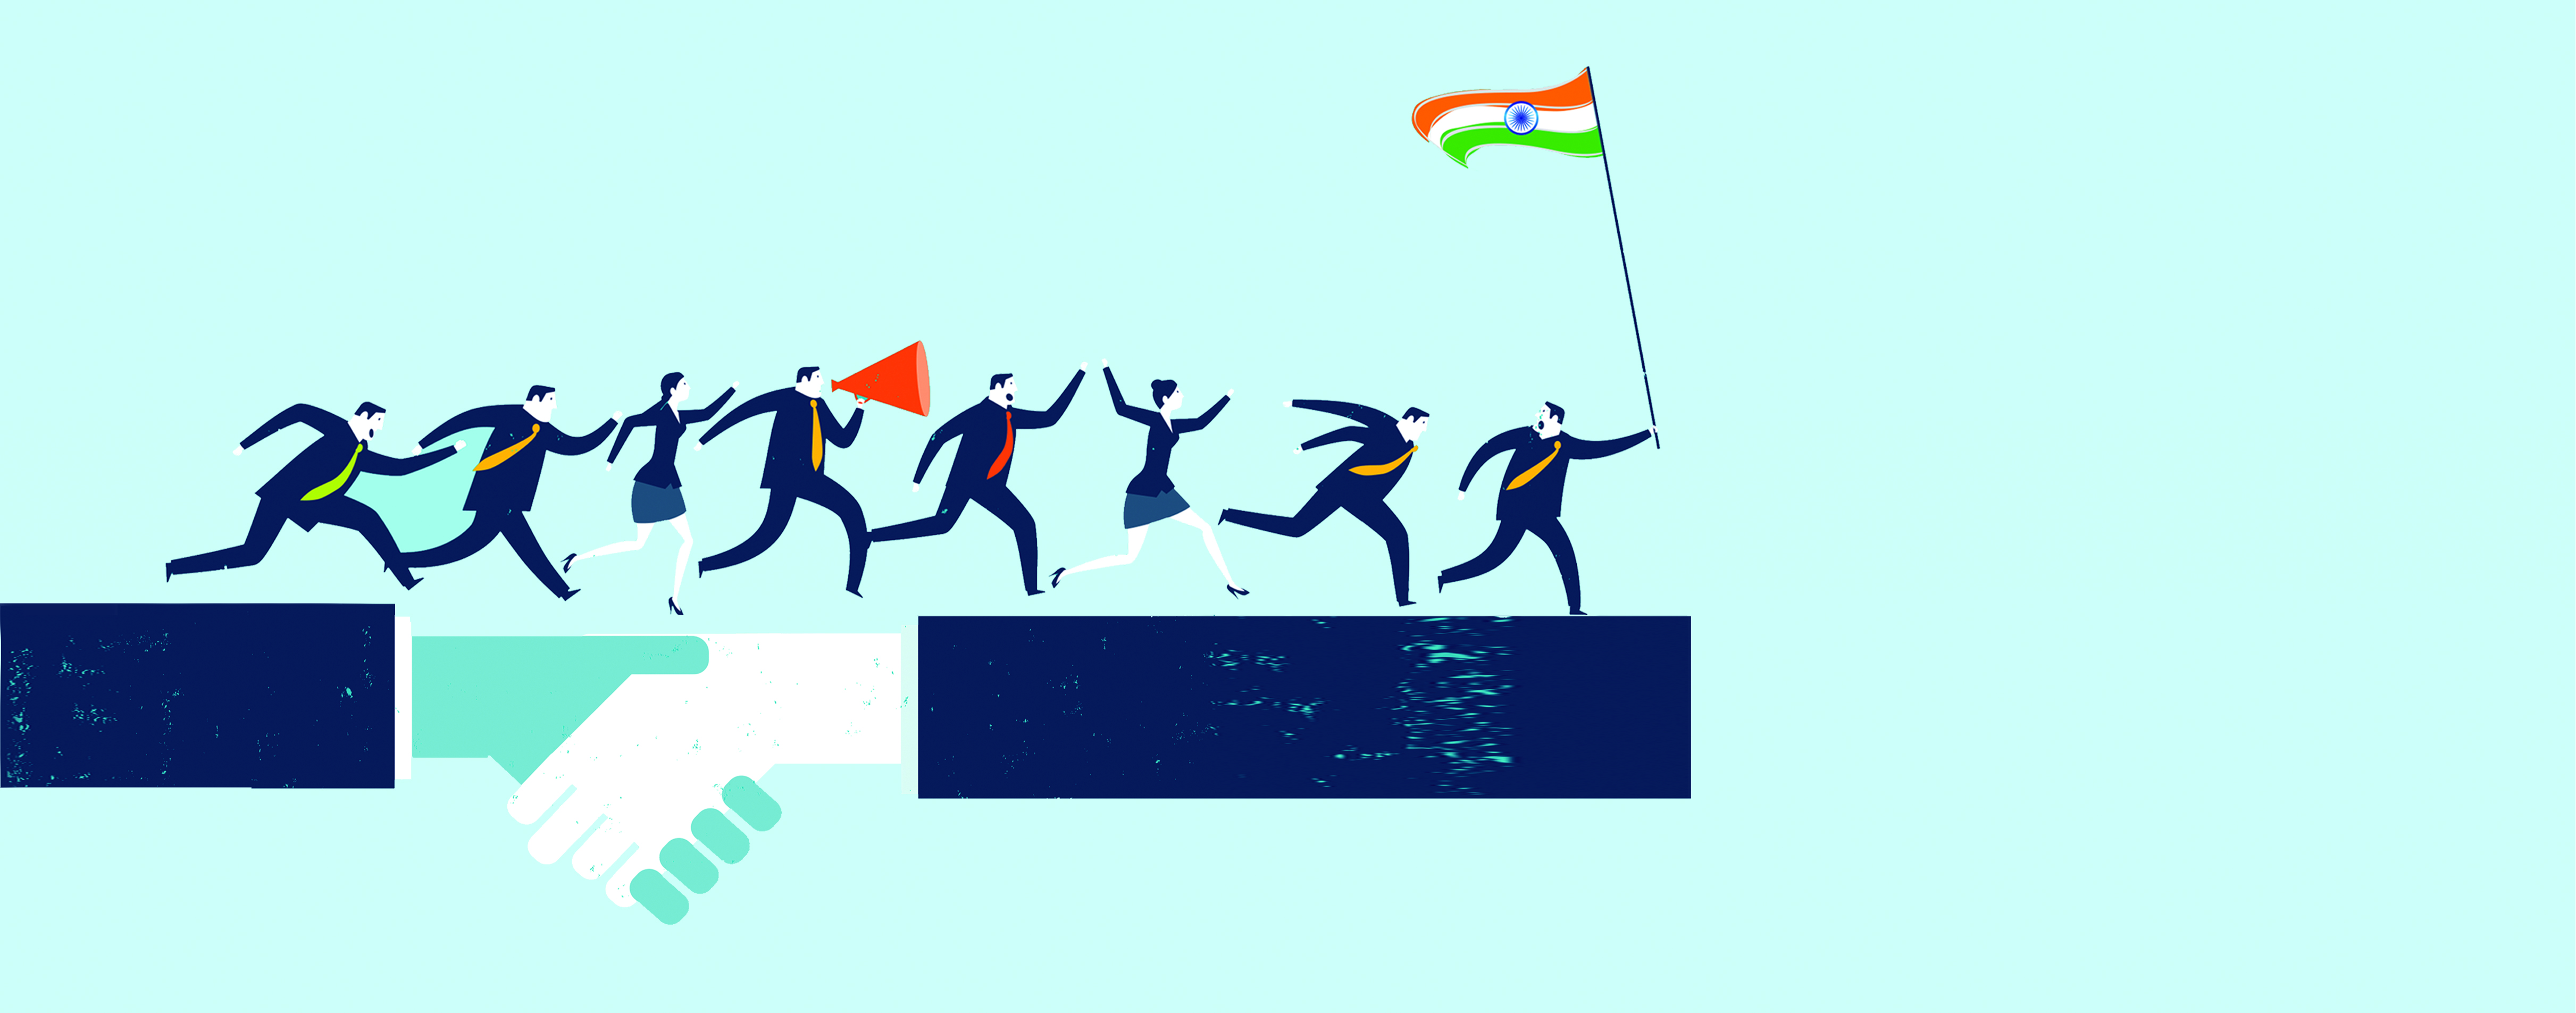 India's rise in 'doing business 2018' ranking  : A Celebration Too Early? March 2018 issue